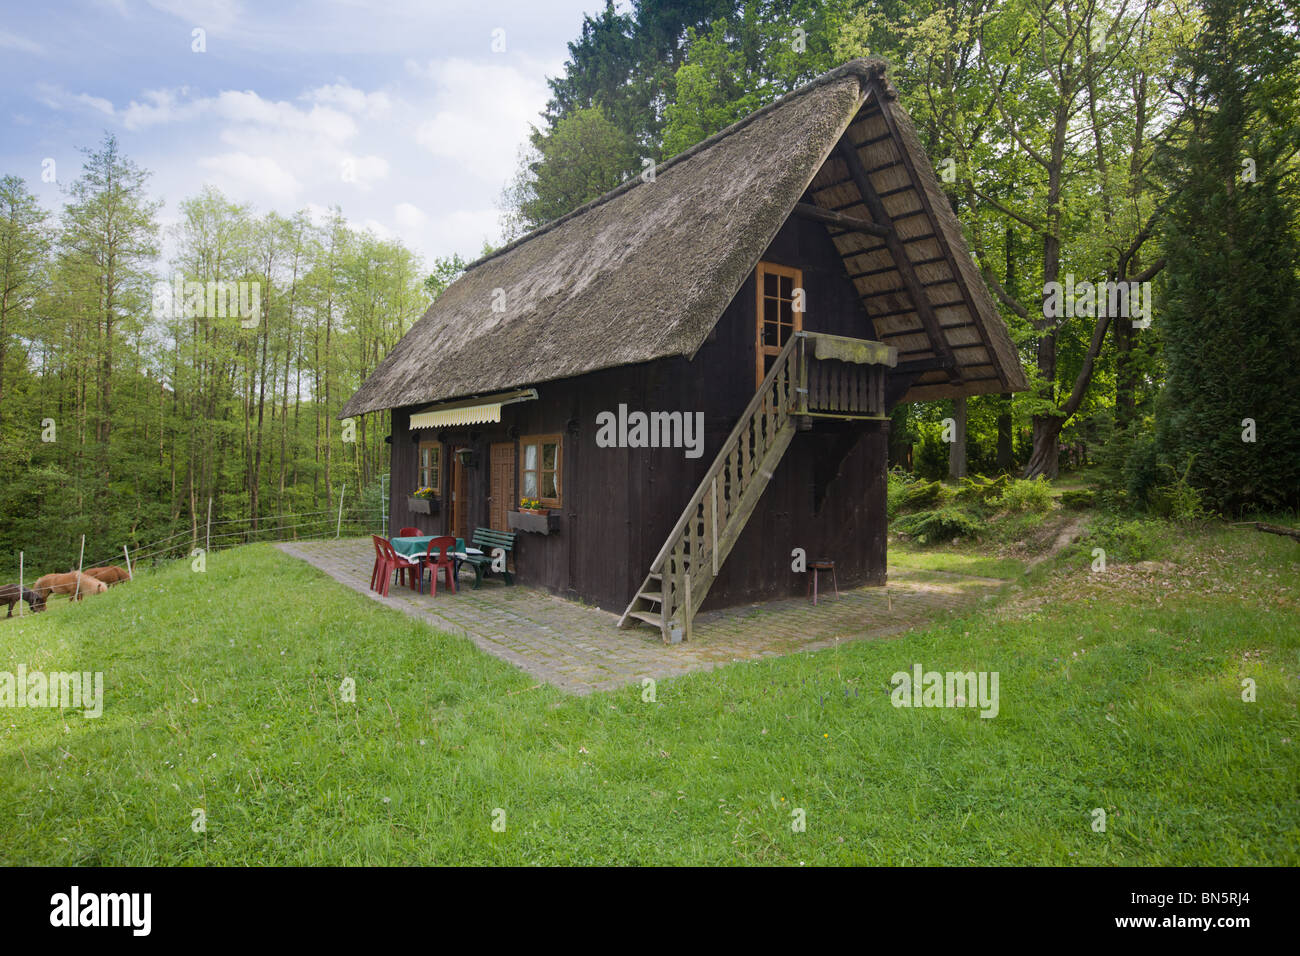 Thatched roof cottage used as a holiday home on a farm Stock Photo